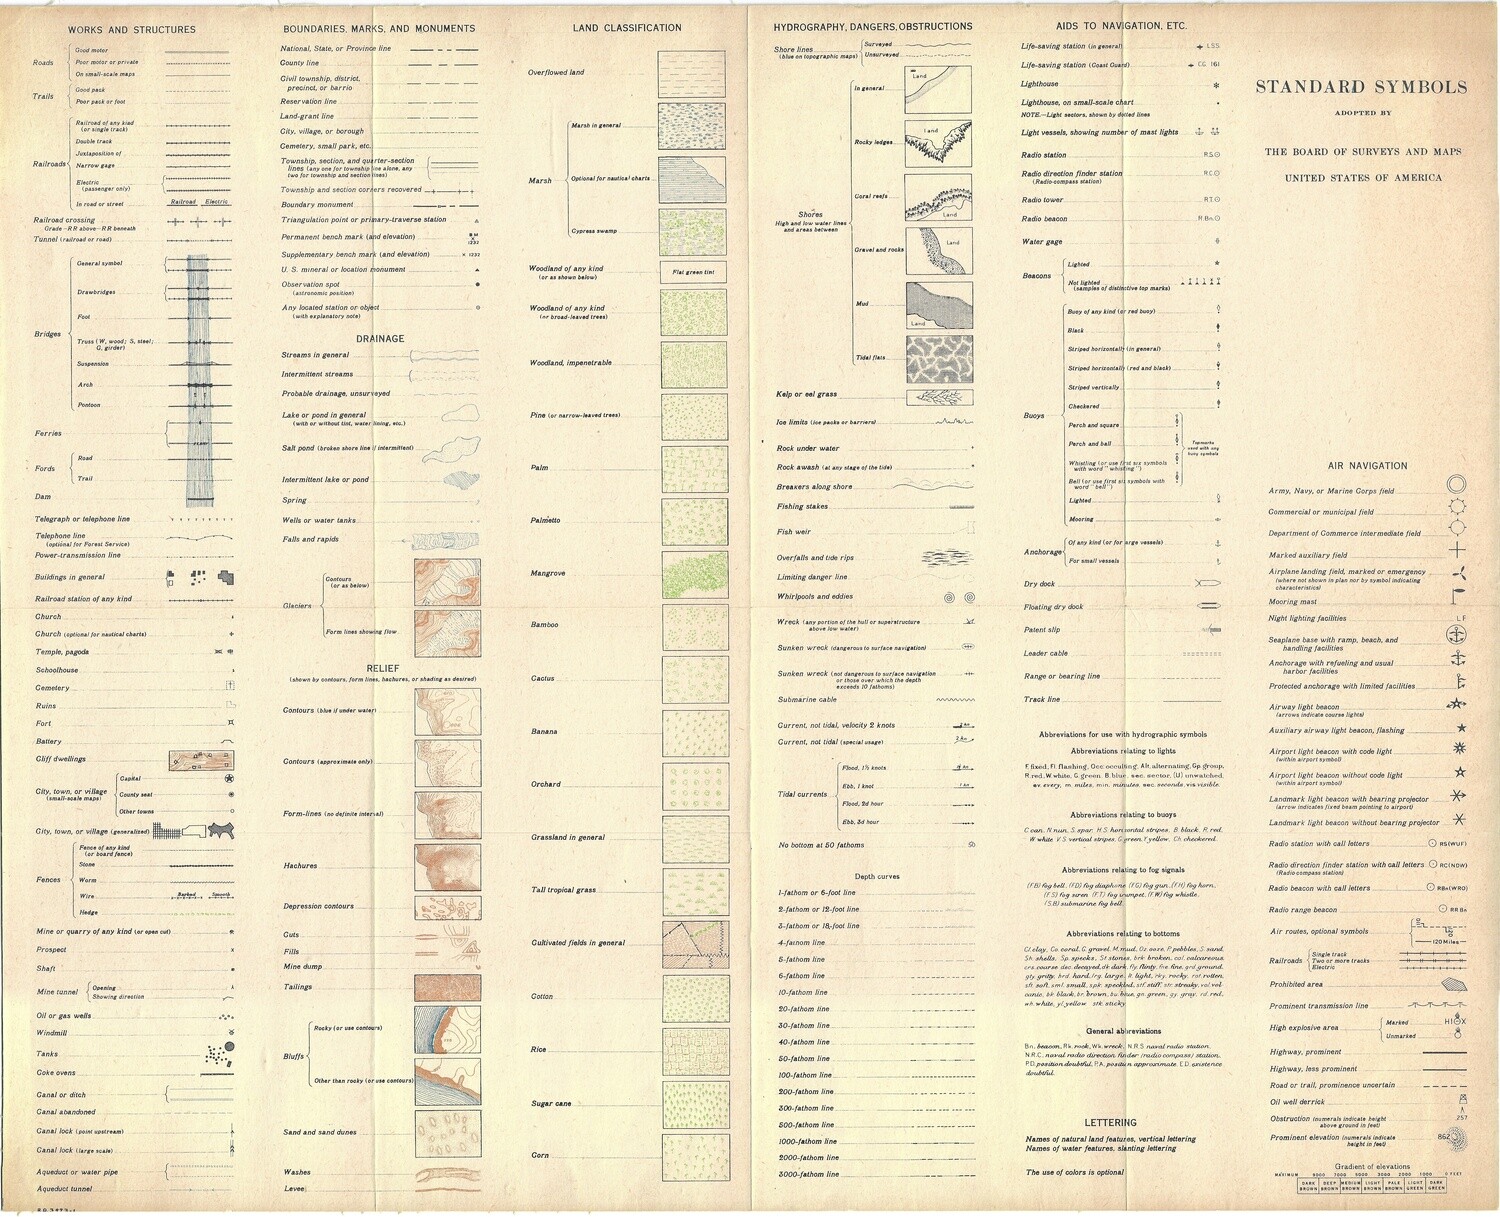 1947 (1912) USGS -Standard Symbols from the Board of Surveys and Maps